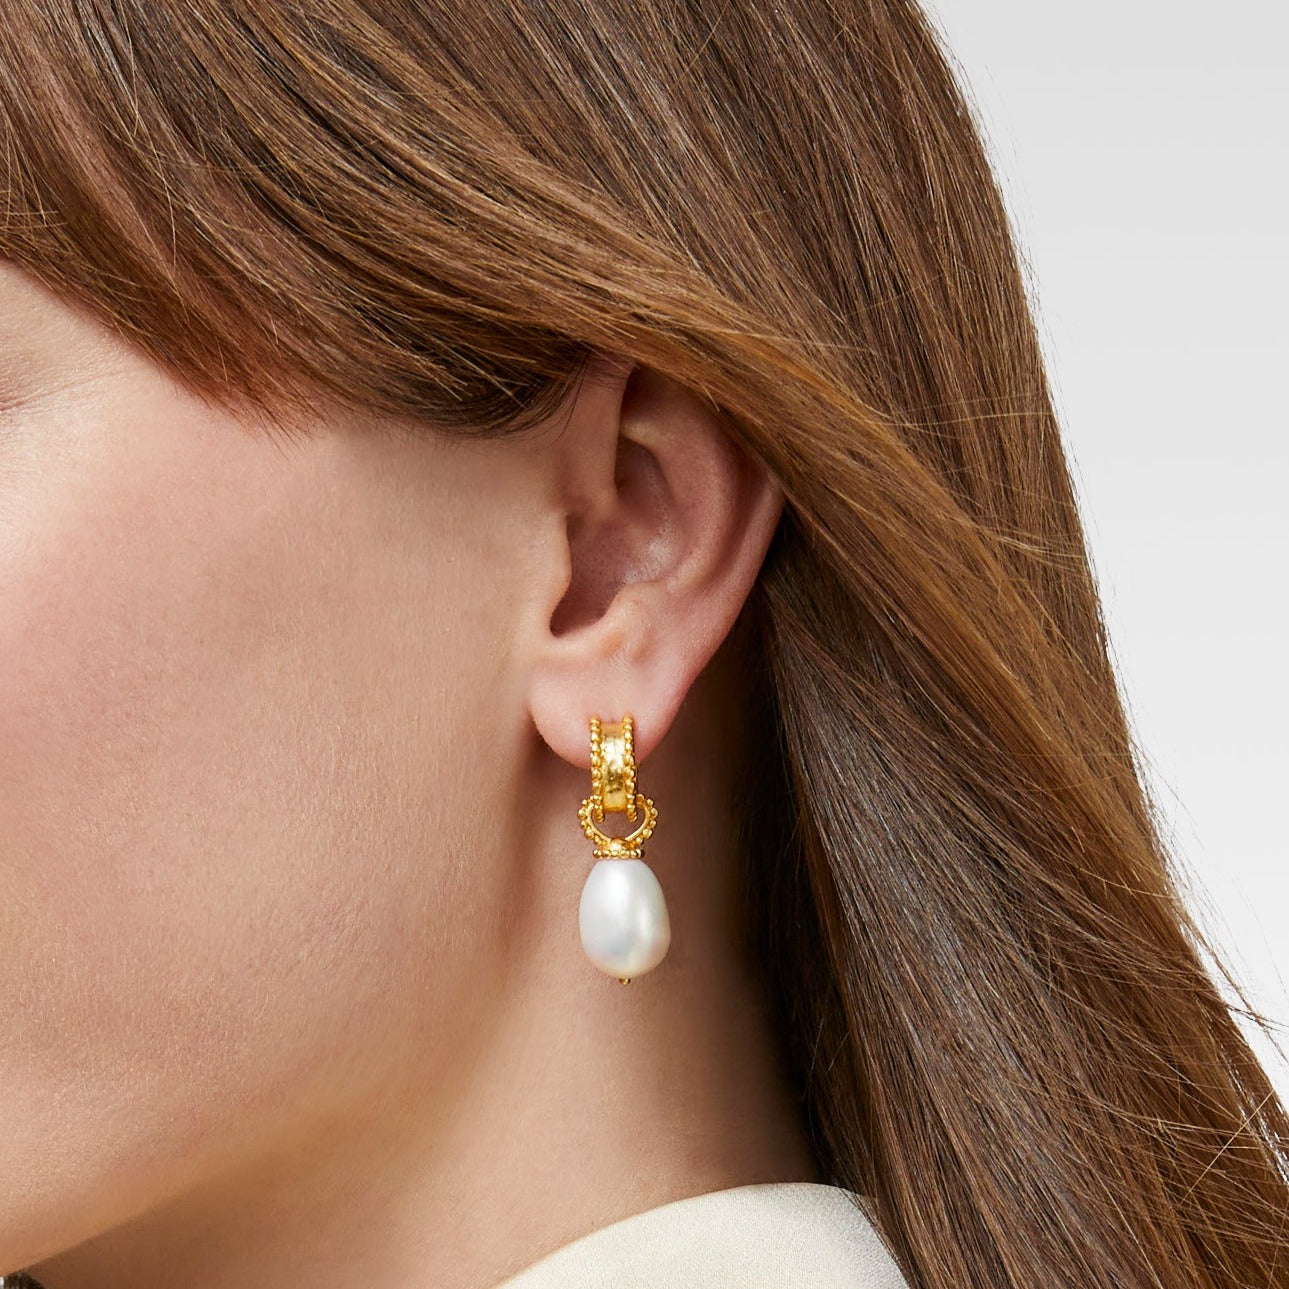 Louis Vuitton Charm and Pearl Yellow Gold Hoop Earrings – Opulent